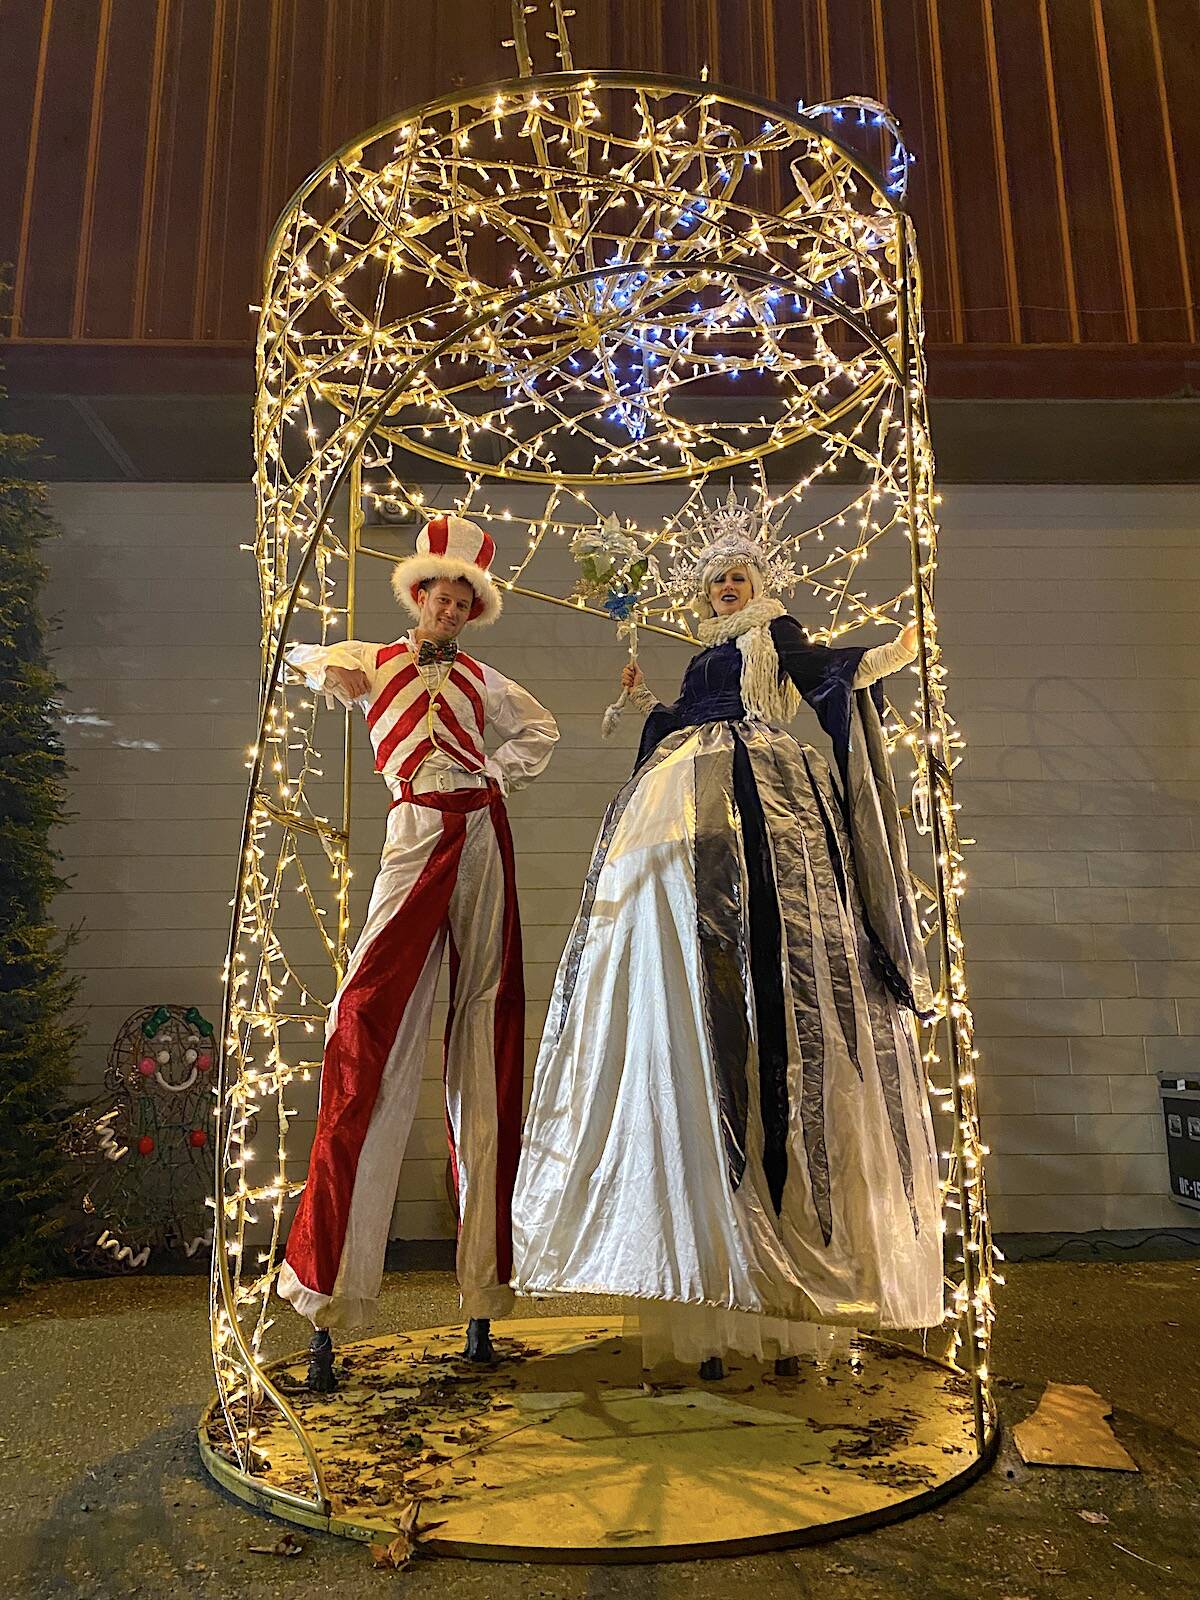 Candycane Man and Lady Winter at Lumagica Surrey light festival at Cloverdale Fairgrounds during a preview event Thursday, Nov. 24, 2022. (Photo: Tom Zillich)